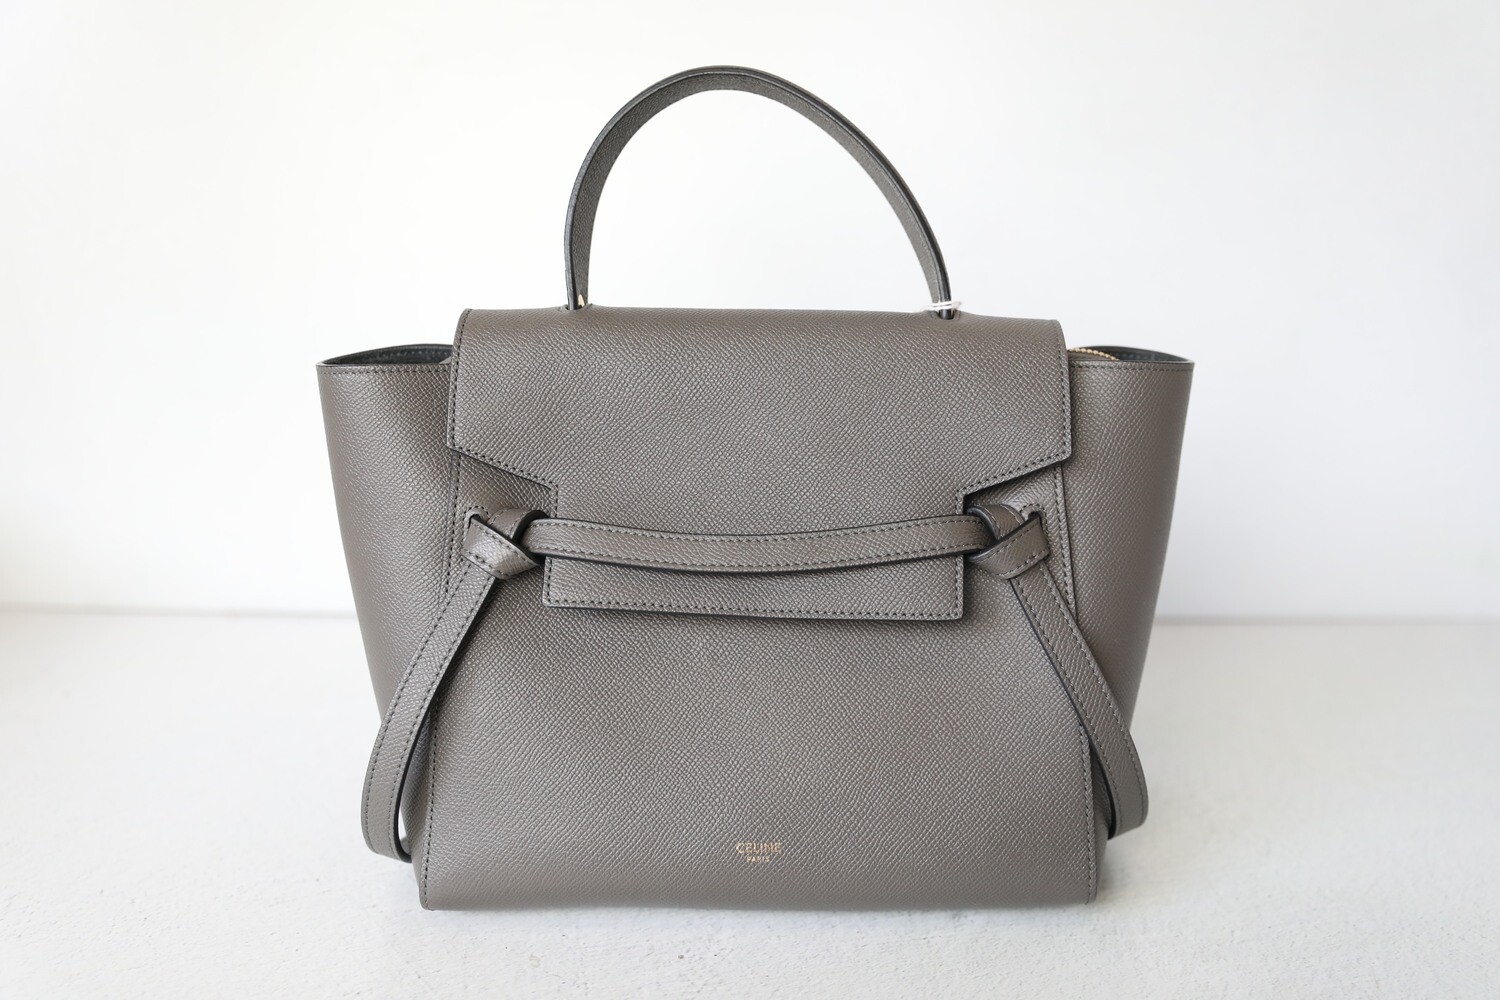 Celine Belt Bag Micro, Grey Leather with Gold Hardware, Preowned No Dustbag  WA001